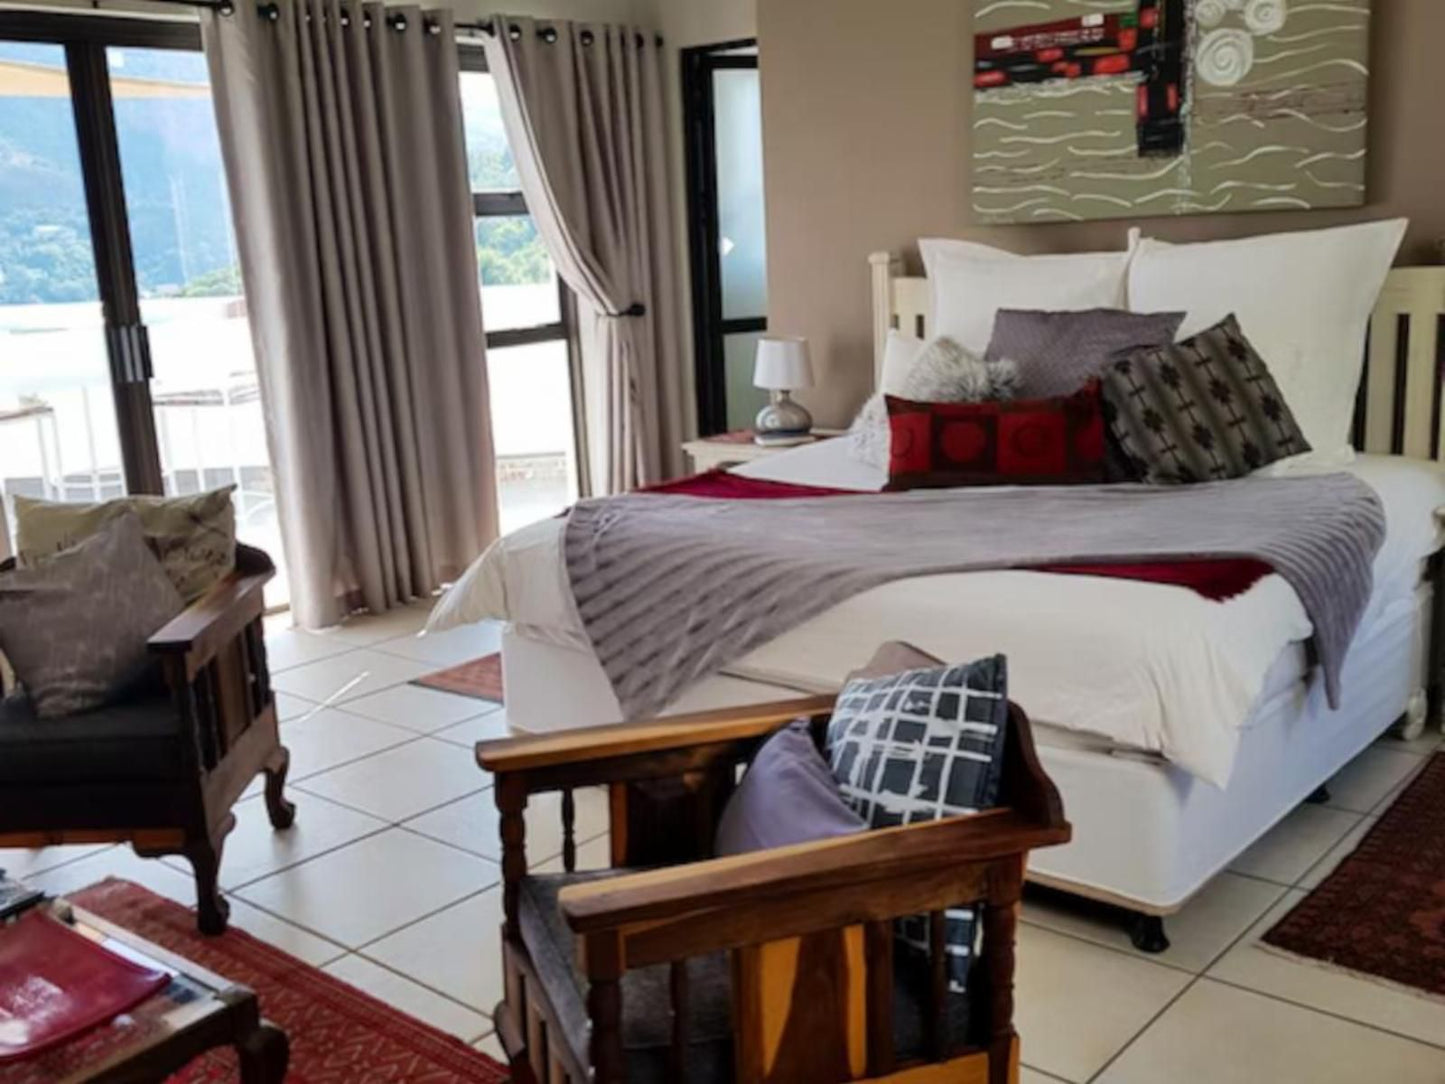 El Shadai Guest House Schoemansville Hartbeespoort North West Province South Africa Bedroom